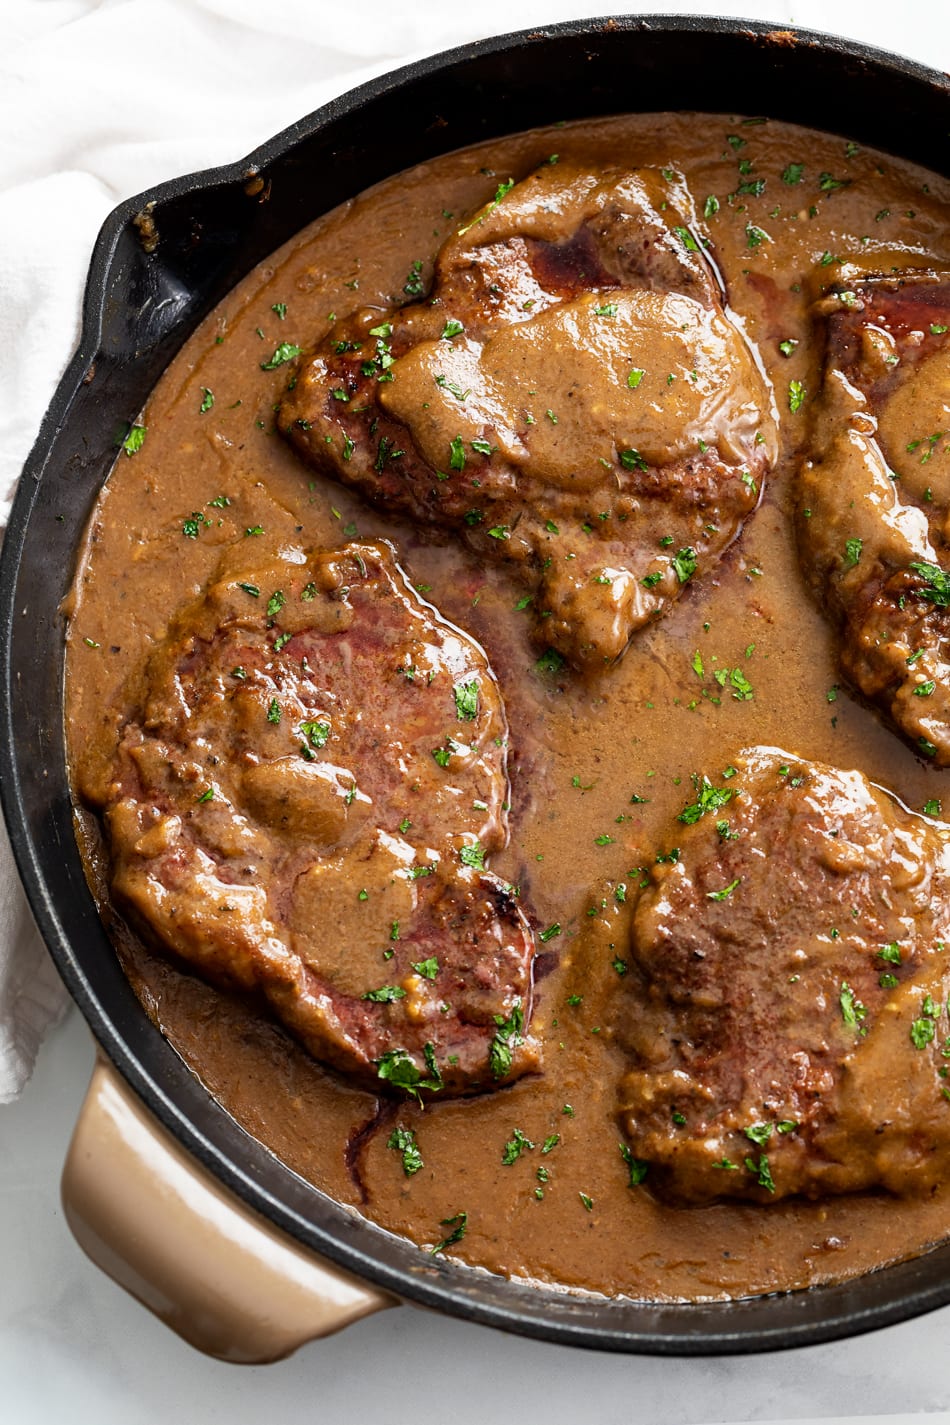 Steak with Gravy in a skillet with parsley on top.